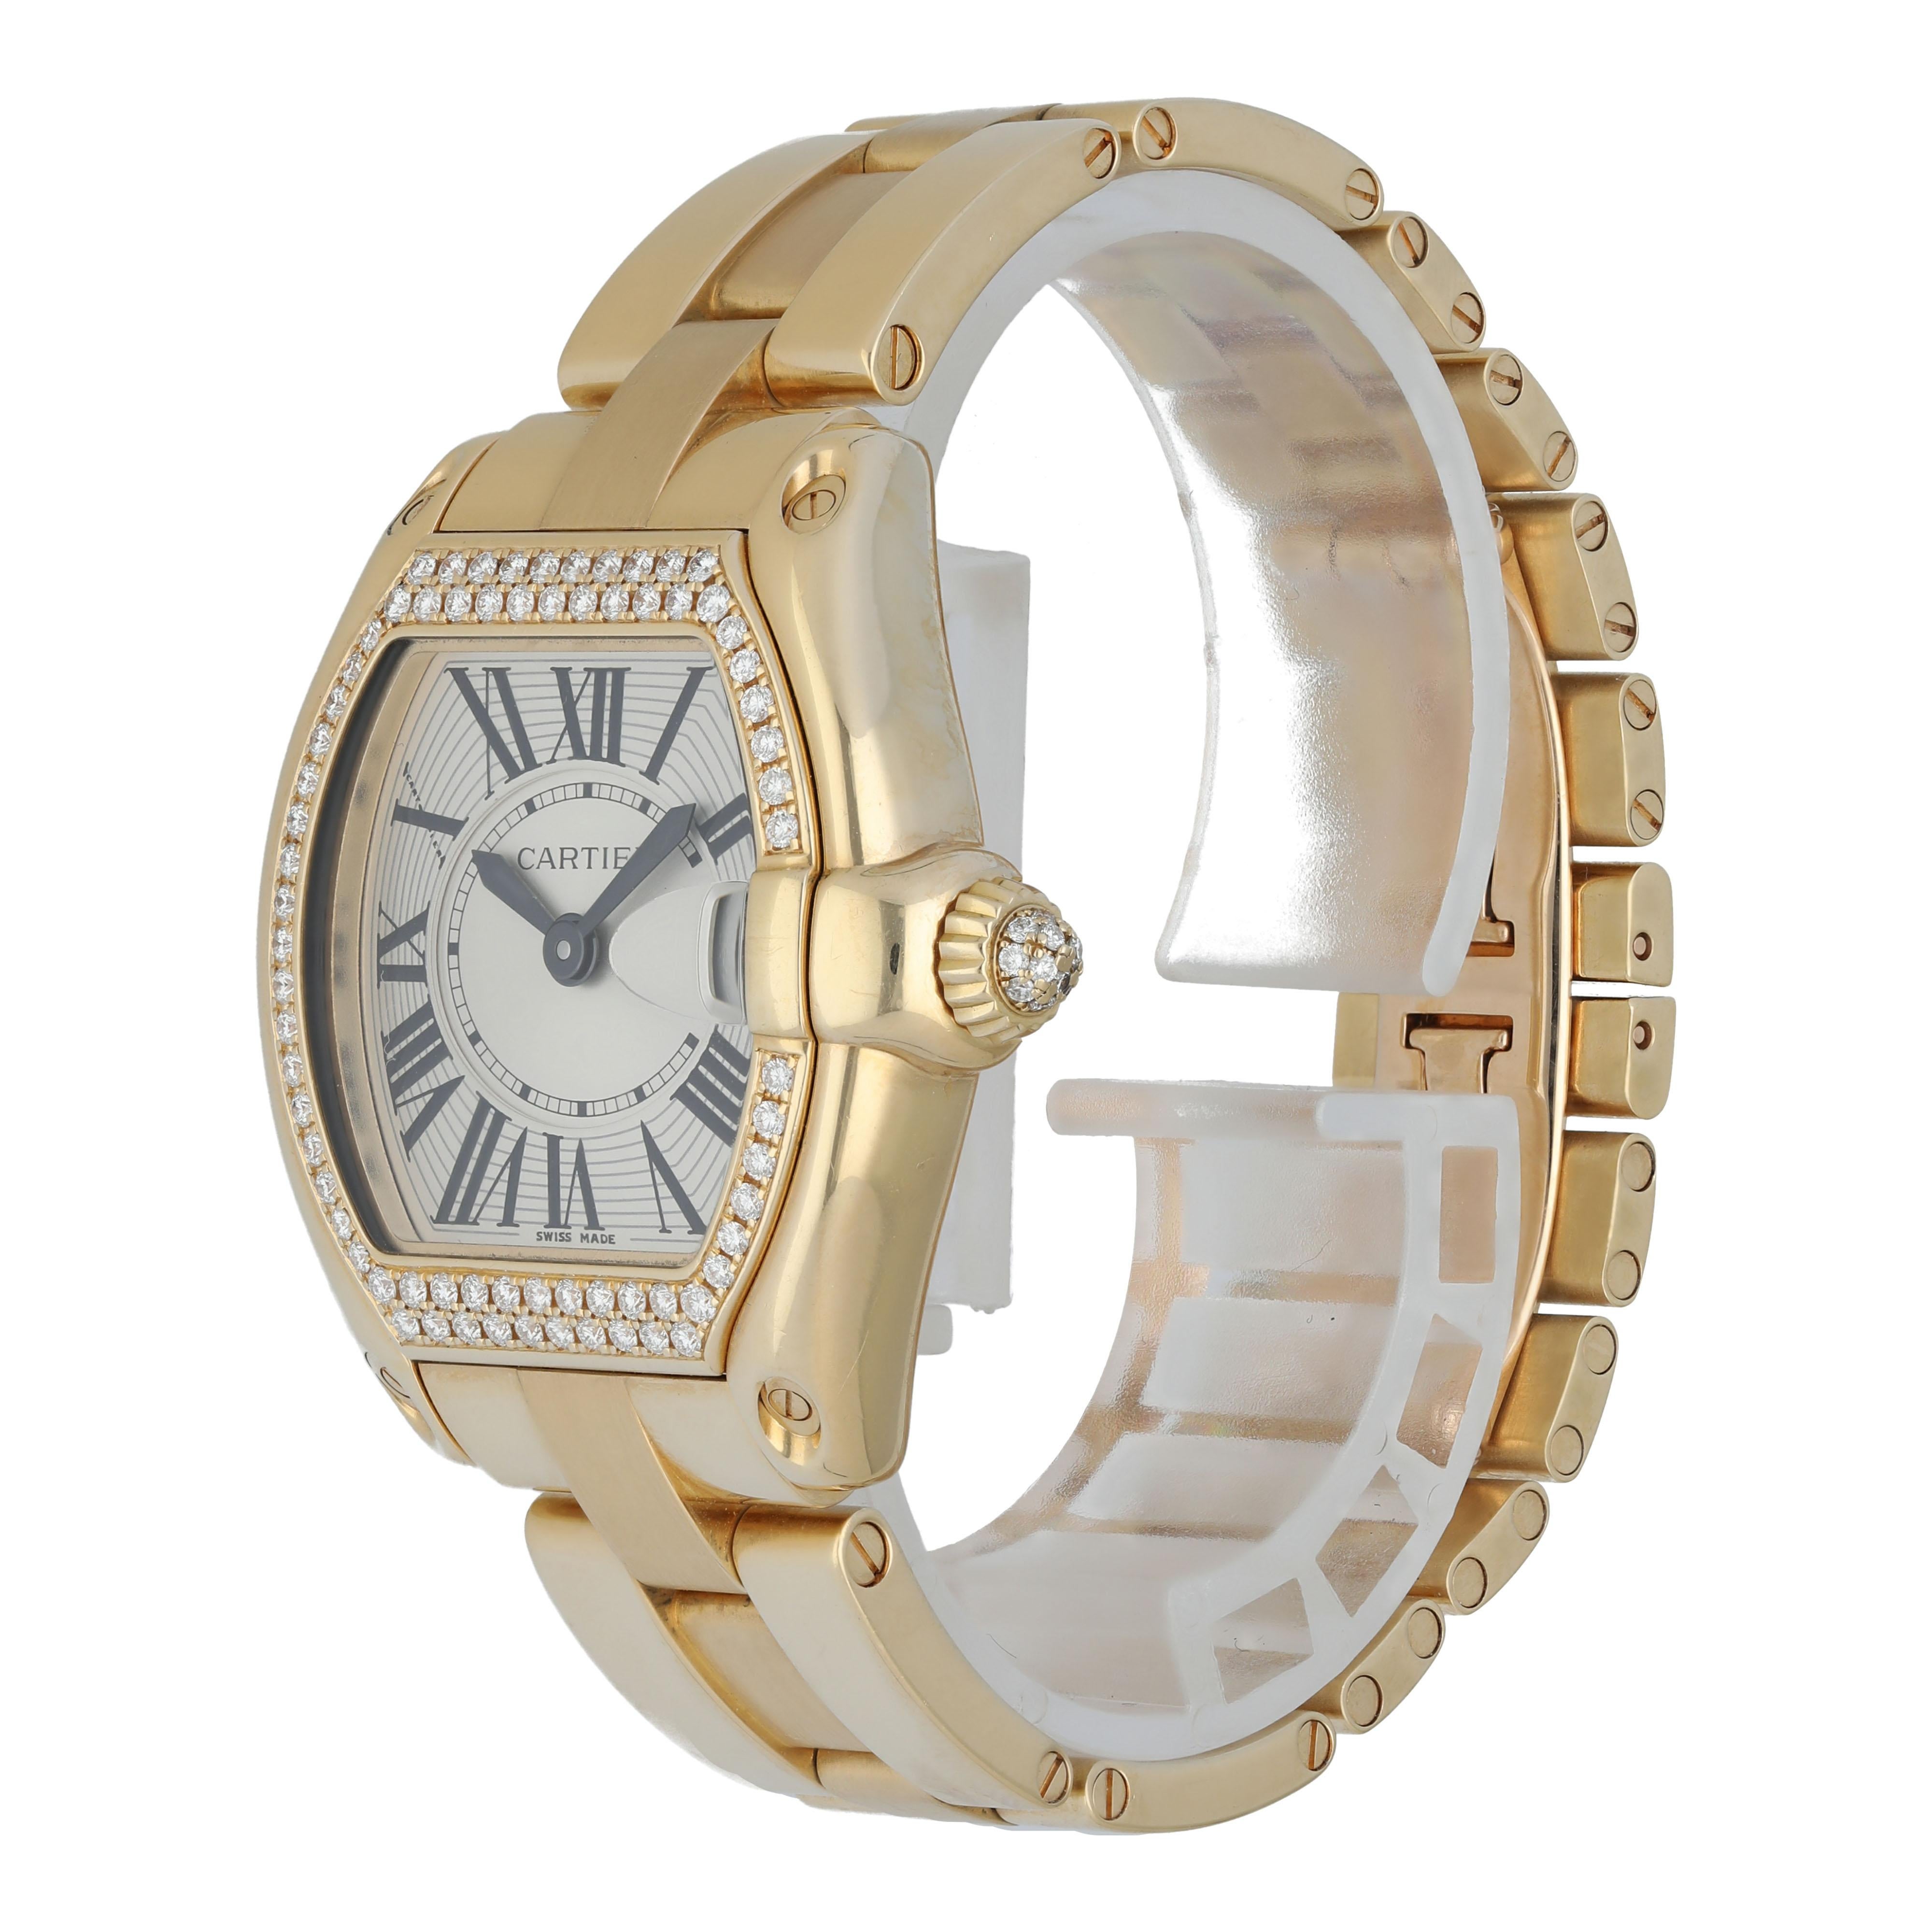 Cartier Roadster 2676 Ladies Watch. 
32mm 18k Yellow gold case.
Yellow Gold factory set diamond bezel and crown. 
Silver dial with Roman numeral hour markers. 
Minute markers on the inner dial. 
Date display at the 3 o'clock position. 
Yellow Gold